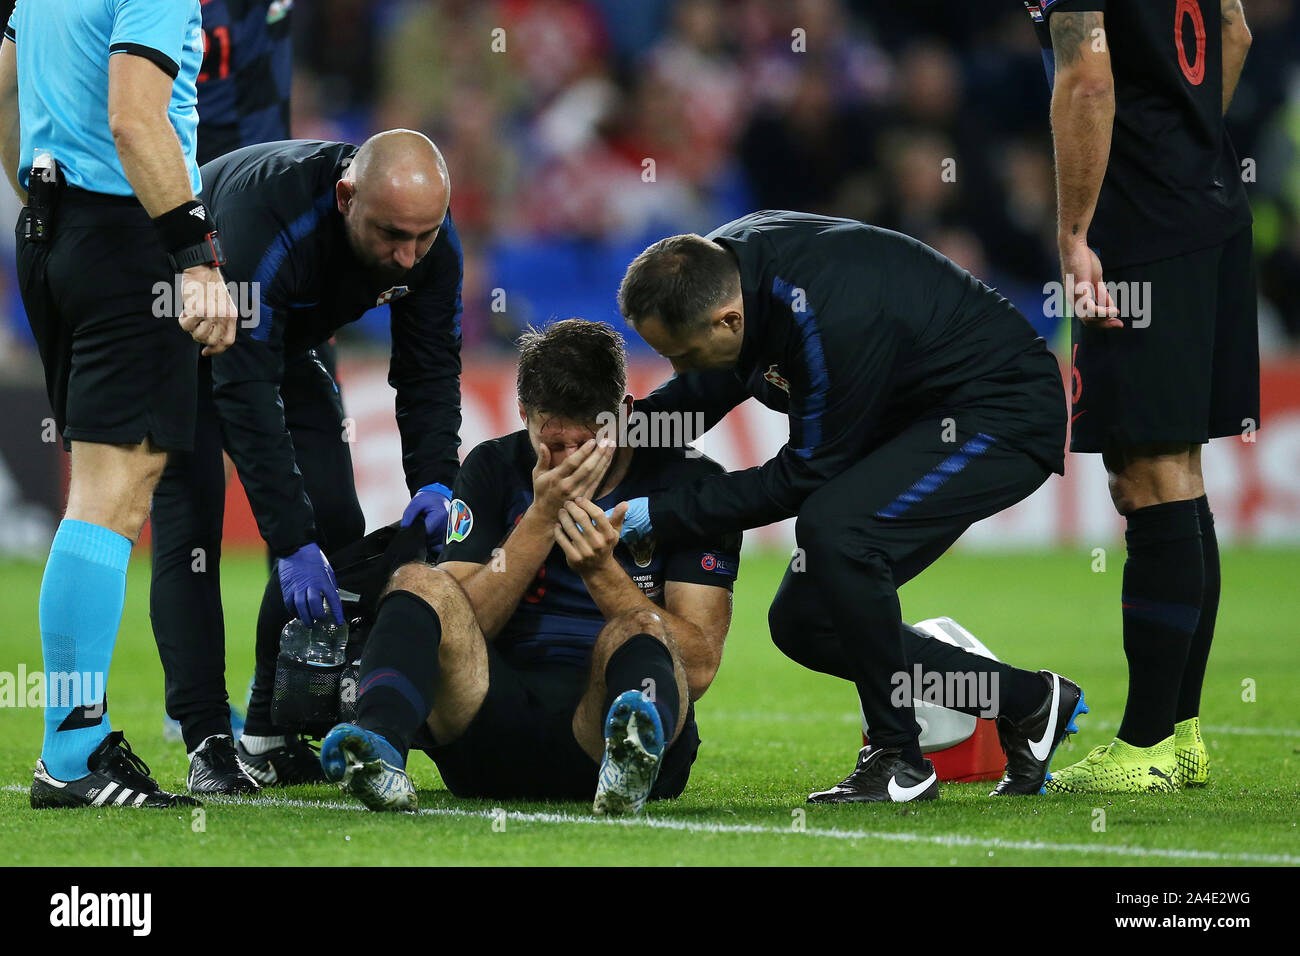 Cardiff, UK. 13th Oct, 2019. Bruno Petkovic of Croatia is treated for an injury. UEFA Euro 2020 qualifier match, Wales v Croatia at the Cardiff city Stadium in Cardiff, South Wales on Sunday 13th October 2019. pic by Andrew Orchard /Andrew Orchard sports photography/Alamy live News EDITORIAL USE ONLY Credit: Andrew Orchard sports photography/Alamy Live News Stock Photo